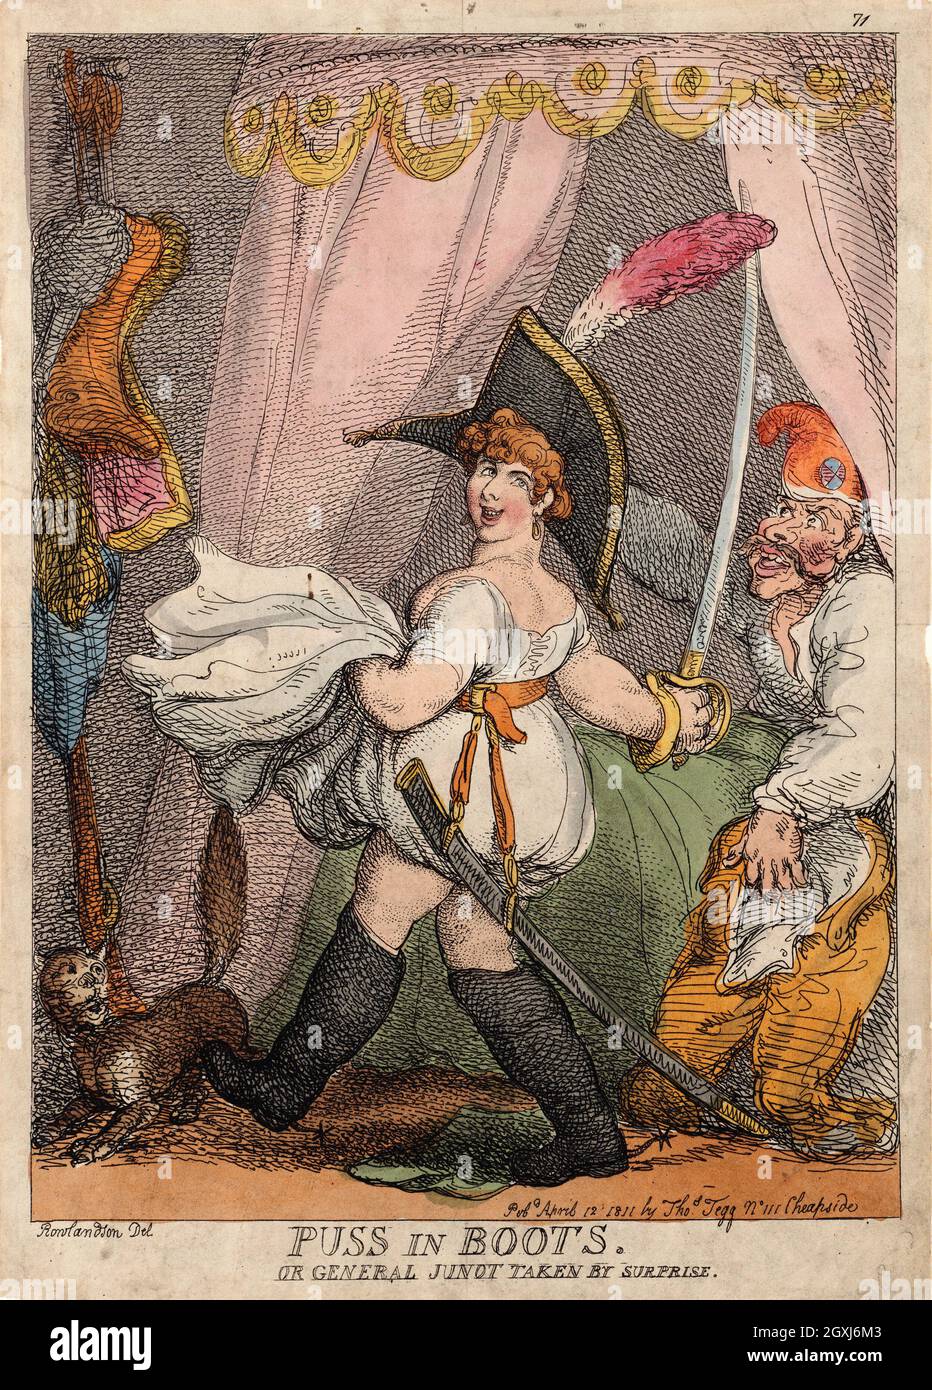 Artist: Thomas Rowlandson (1756-1827) an English artist and caricaturist of the Georgian Era. A social observer, he was a prolific artist and print maker.  Credit: Thomas Rowlandson/Alamy Stock Photo